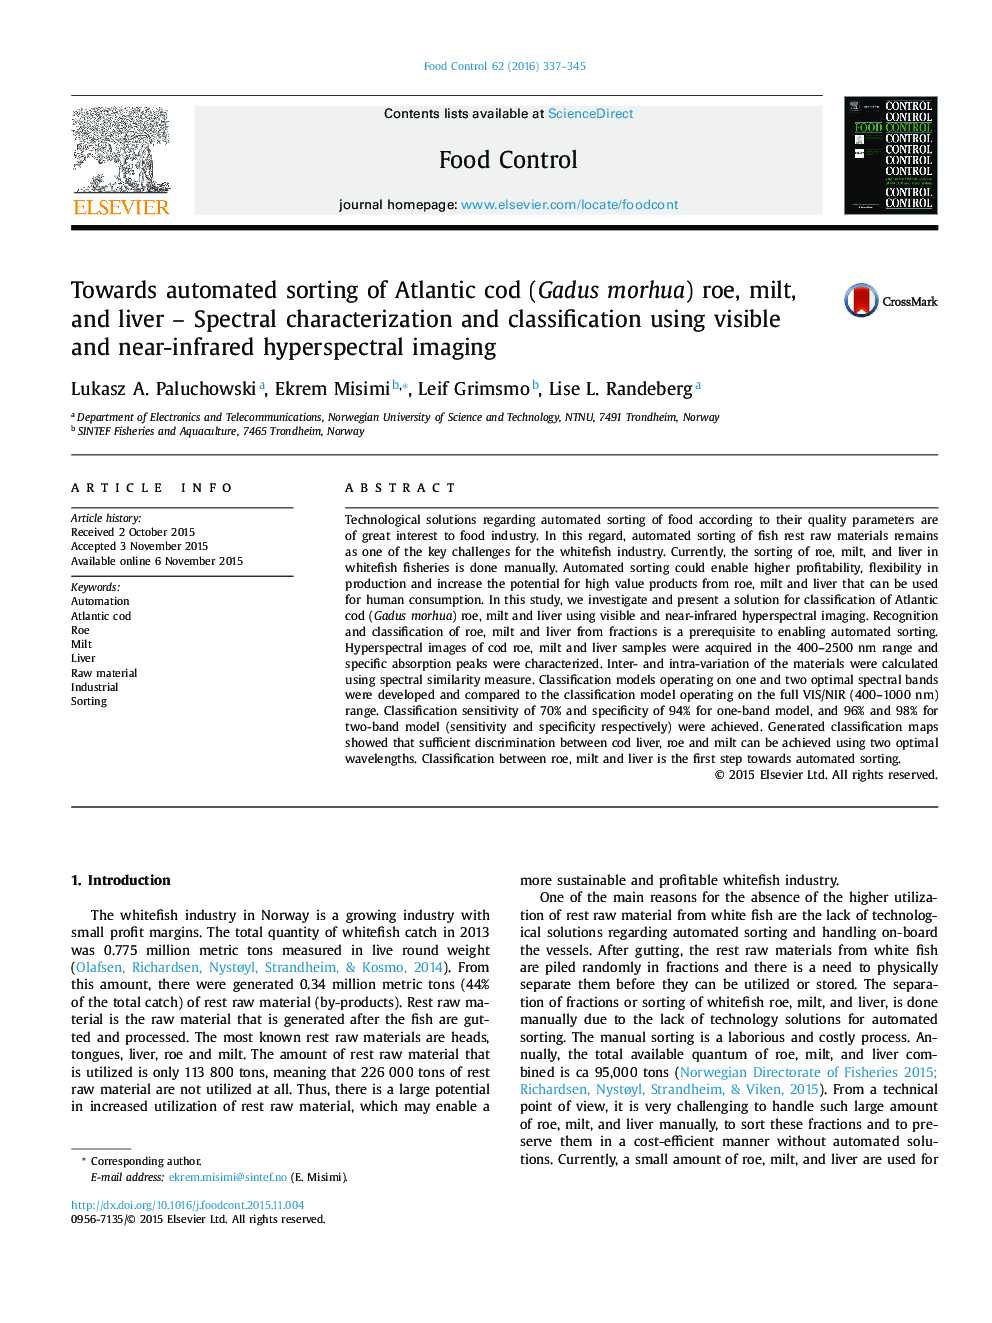 Towards automated sorting of Atlantic cod (Gadus morhua) roe, milt, and liver - Spectral characterization and classification using visible and near-infrared hyperspectral imaging